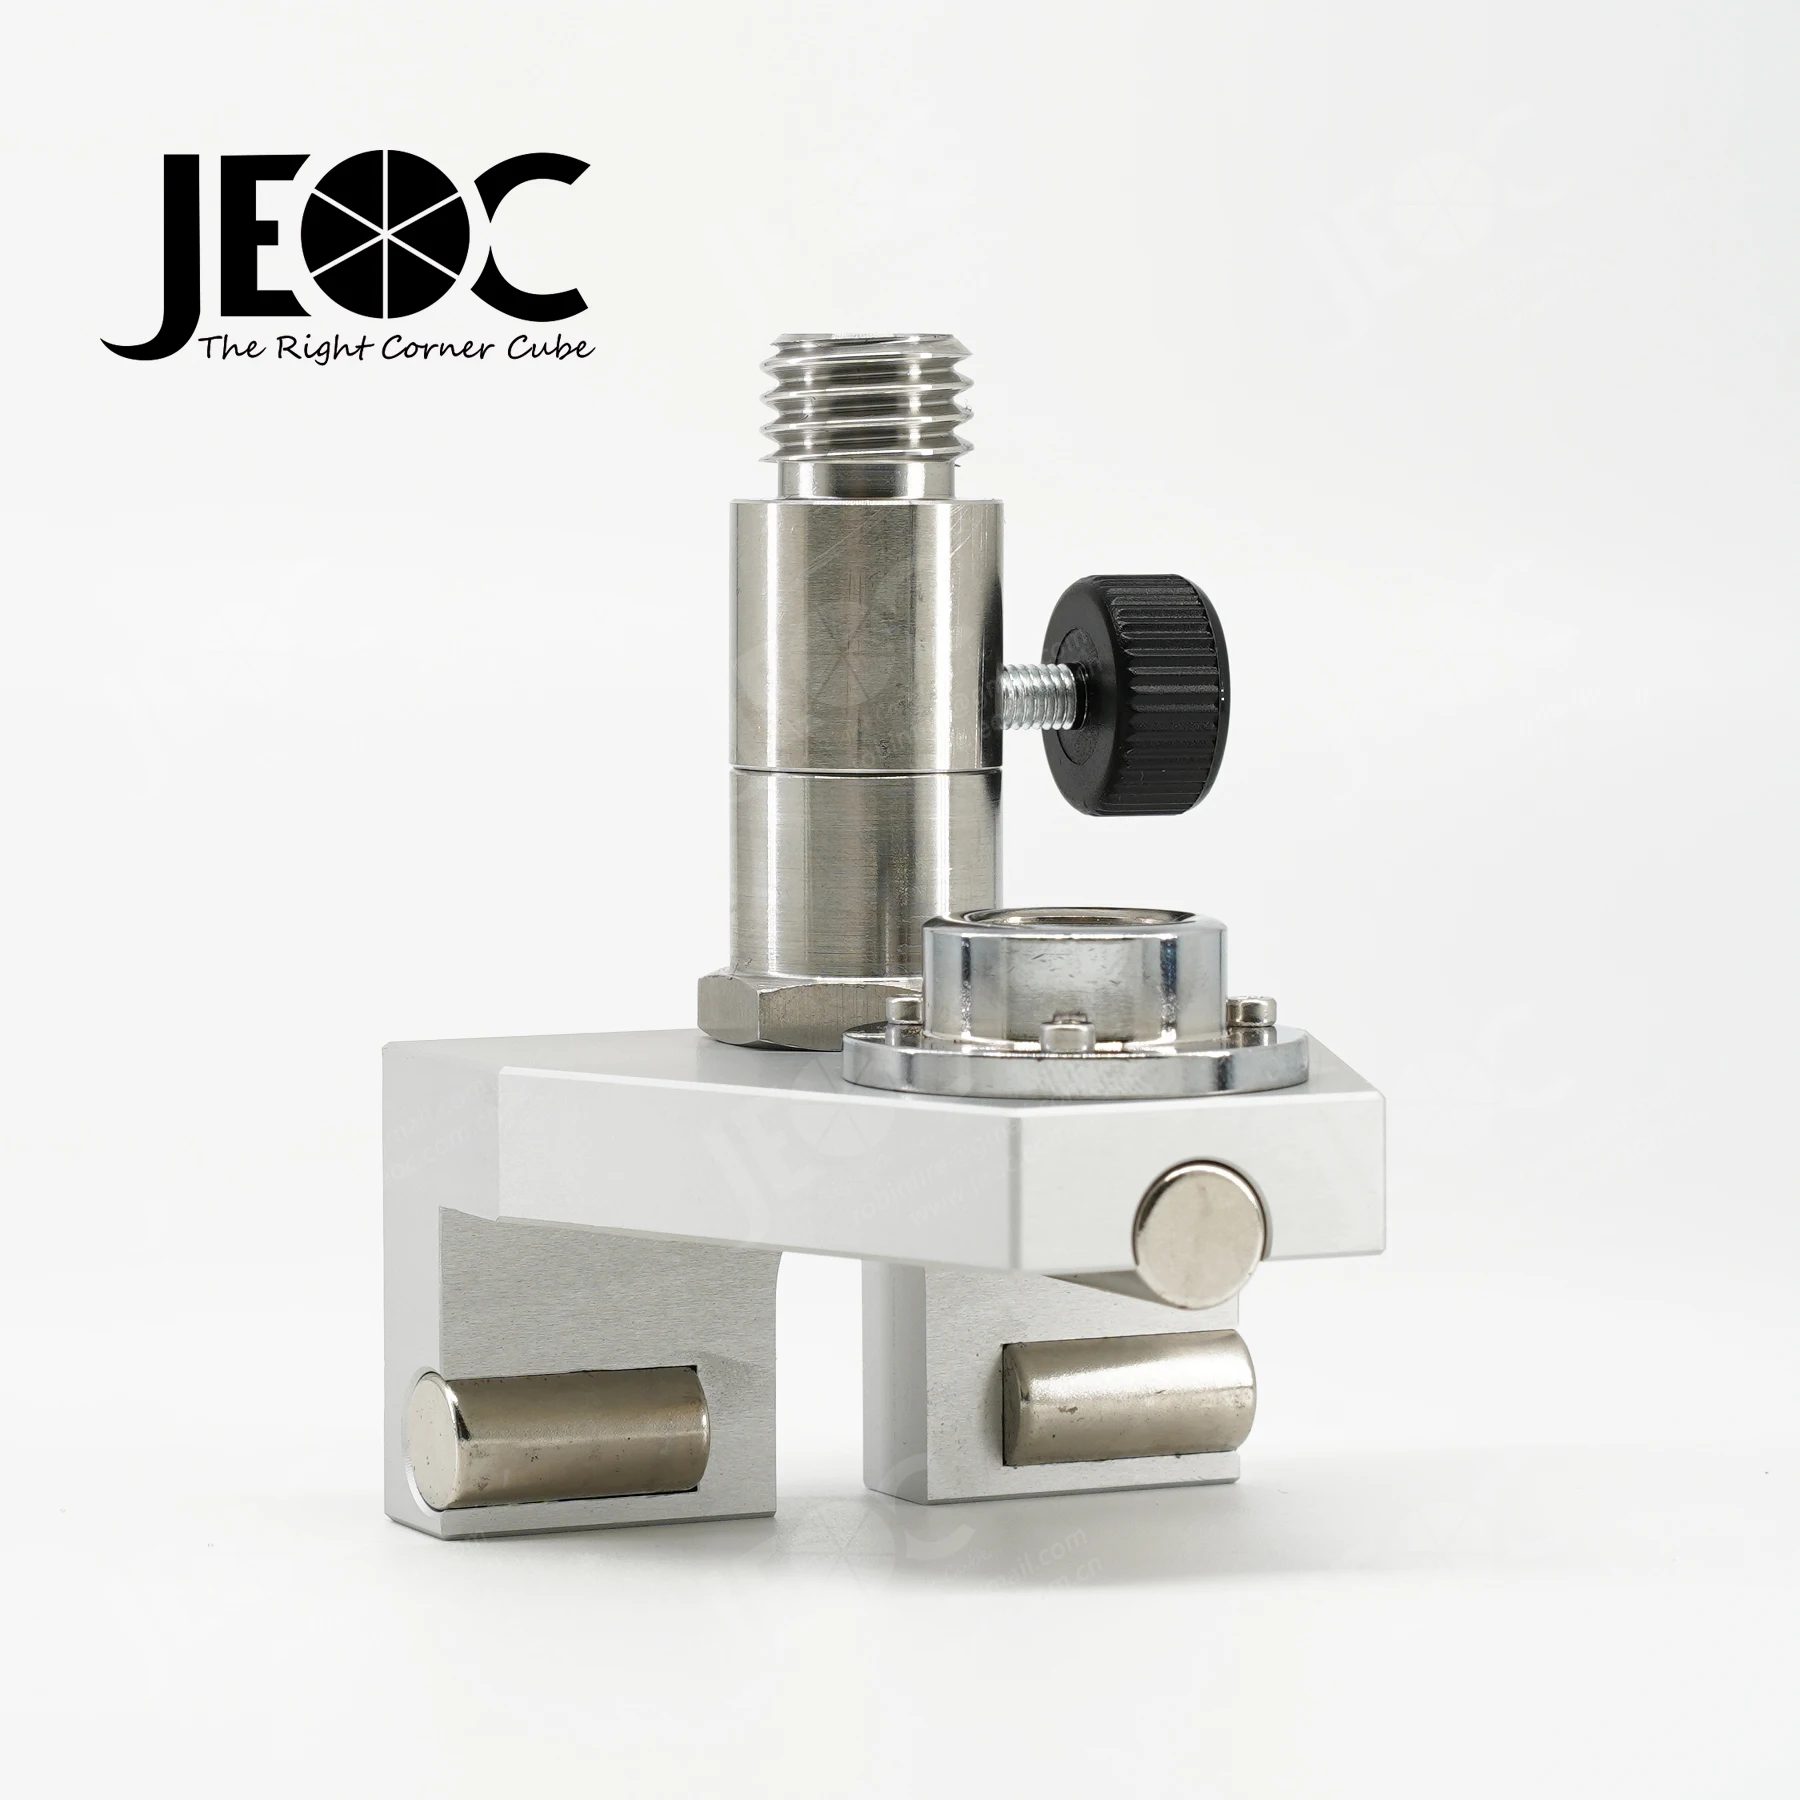 JEOC Magnetic Railshoe with 5/8inch Threaded Mount, Monitoring Prism Base with Strong Magnet, for Railway Surveying Topography